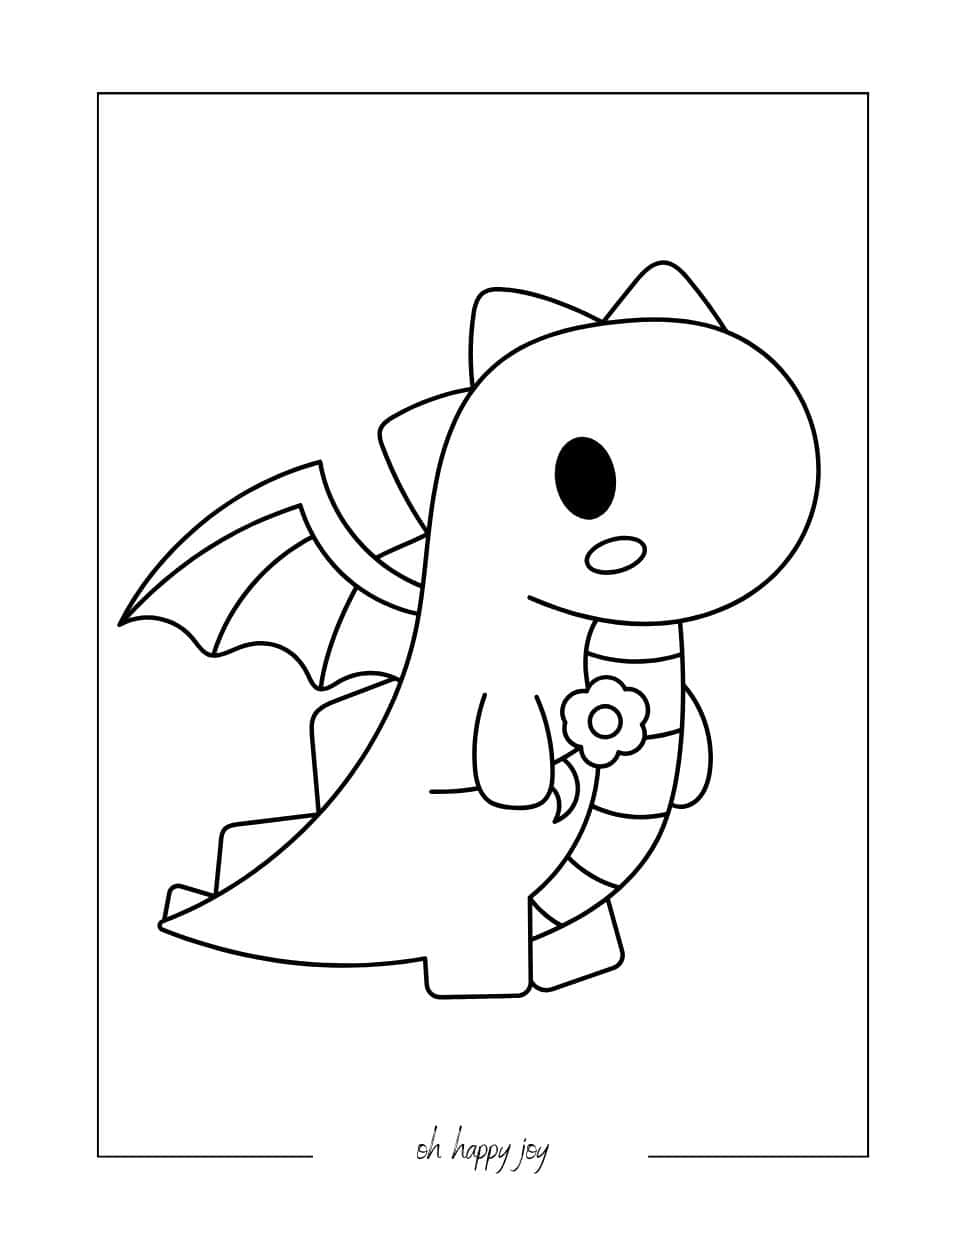 Dragon with Flower Coloring Page